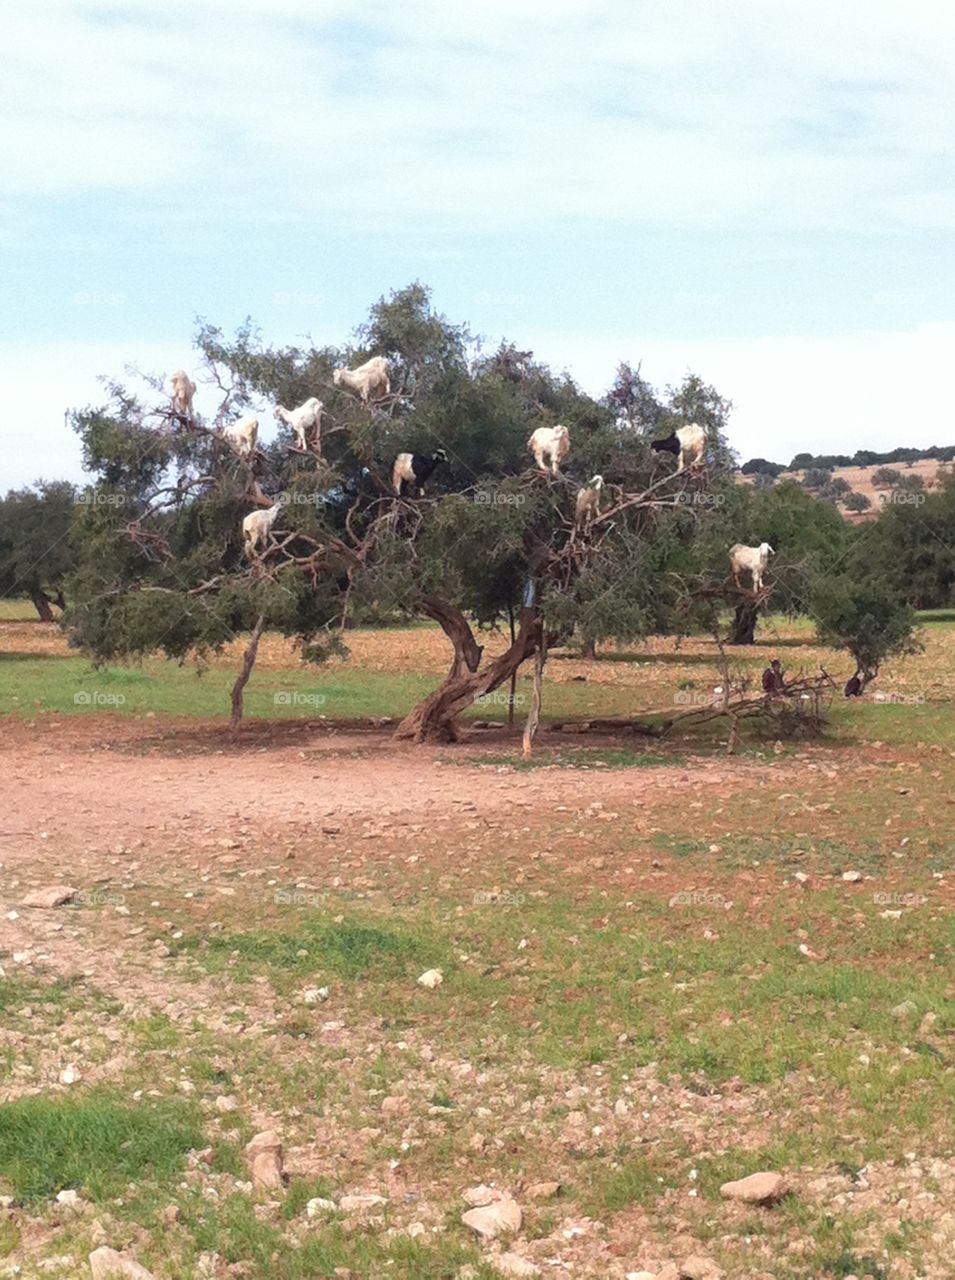 Goats in a tree in Morocco 